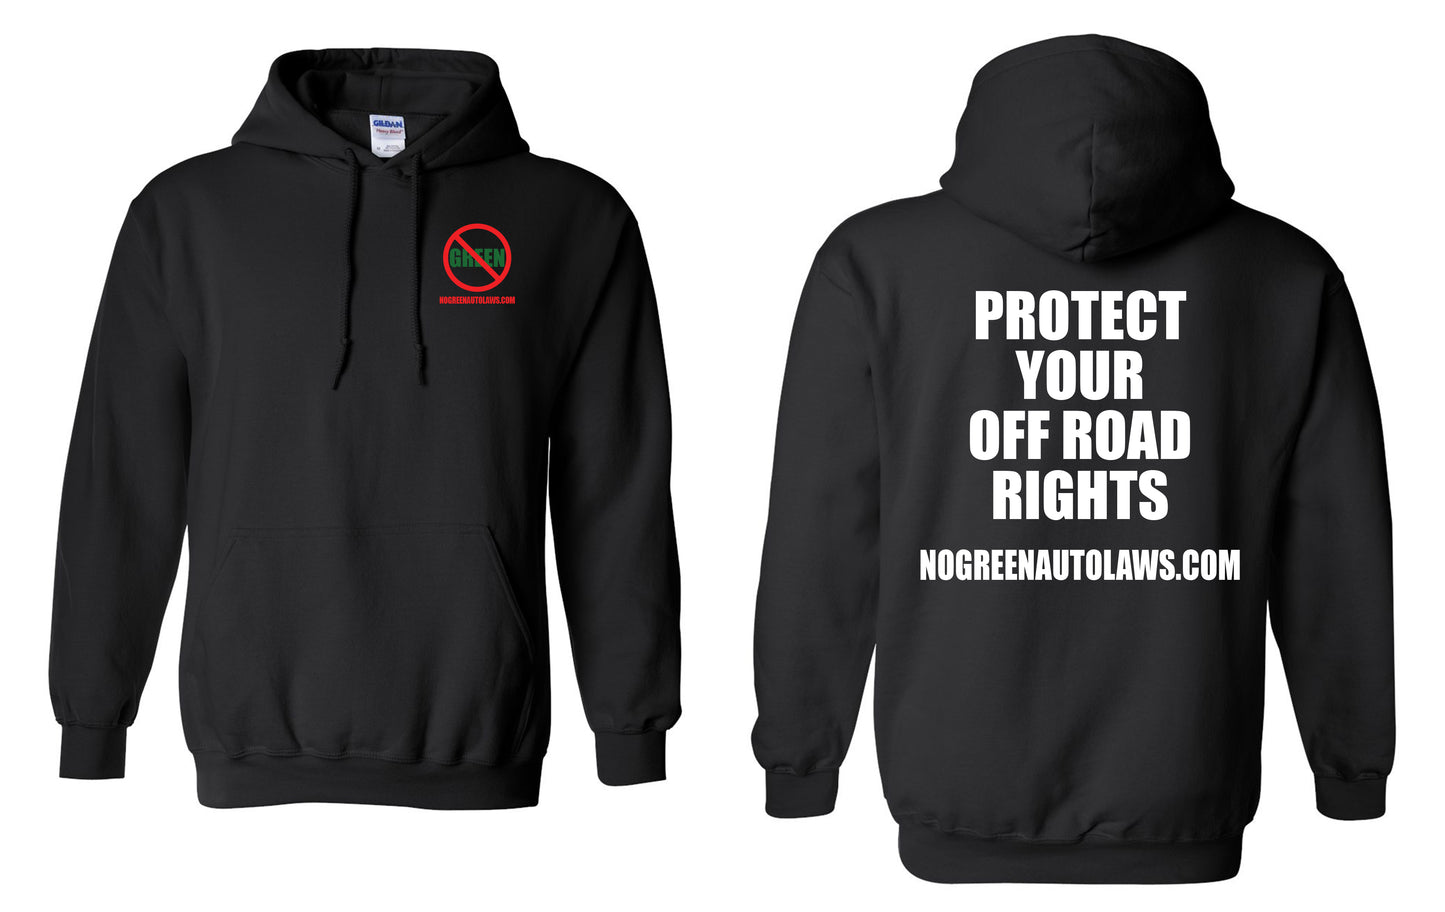 C3 - HOODIE - PROTECT YOUR OFF ROAD RIGHTS!